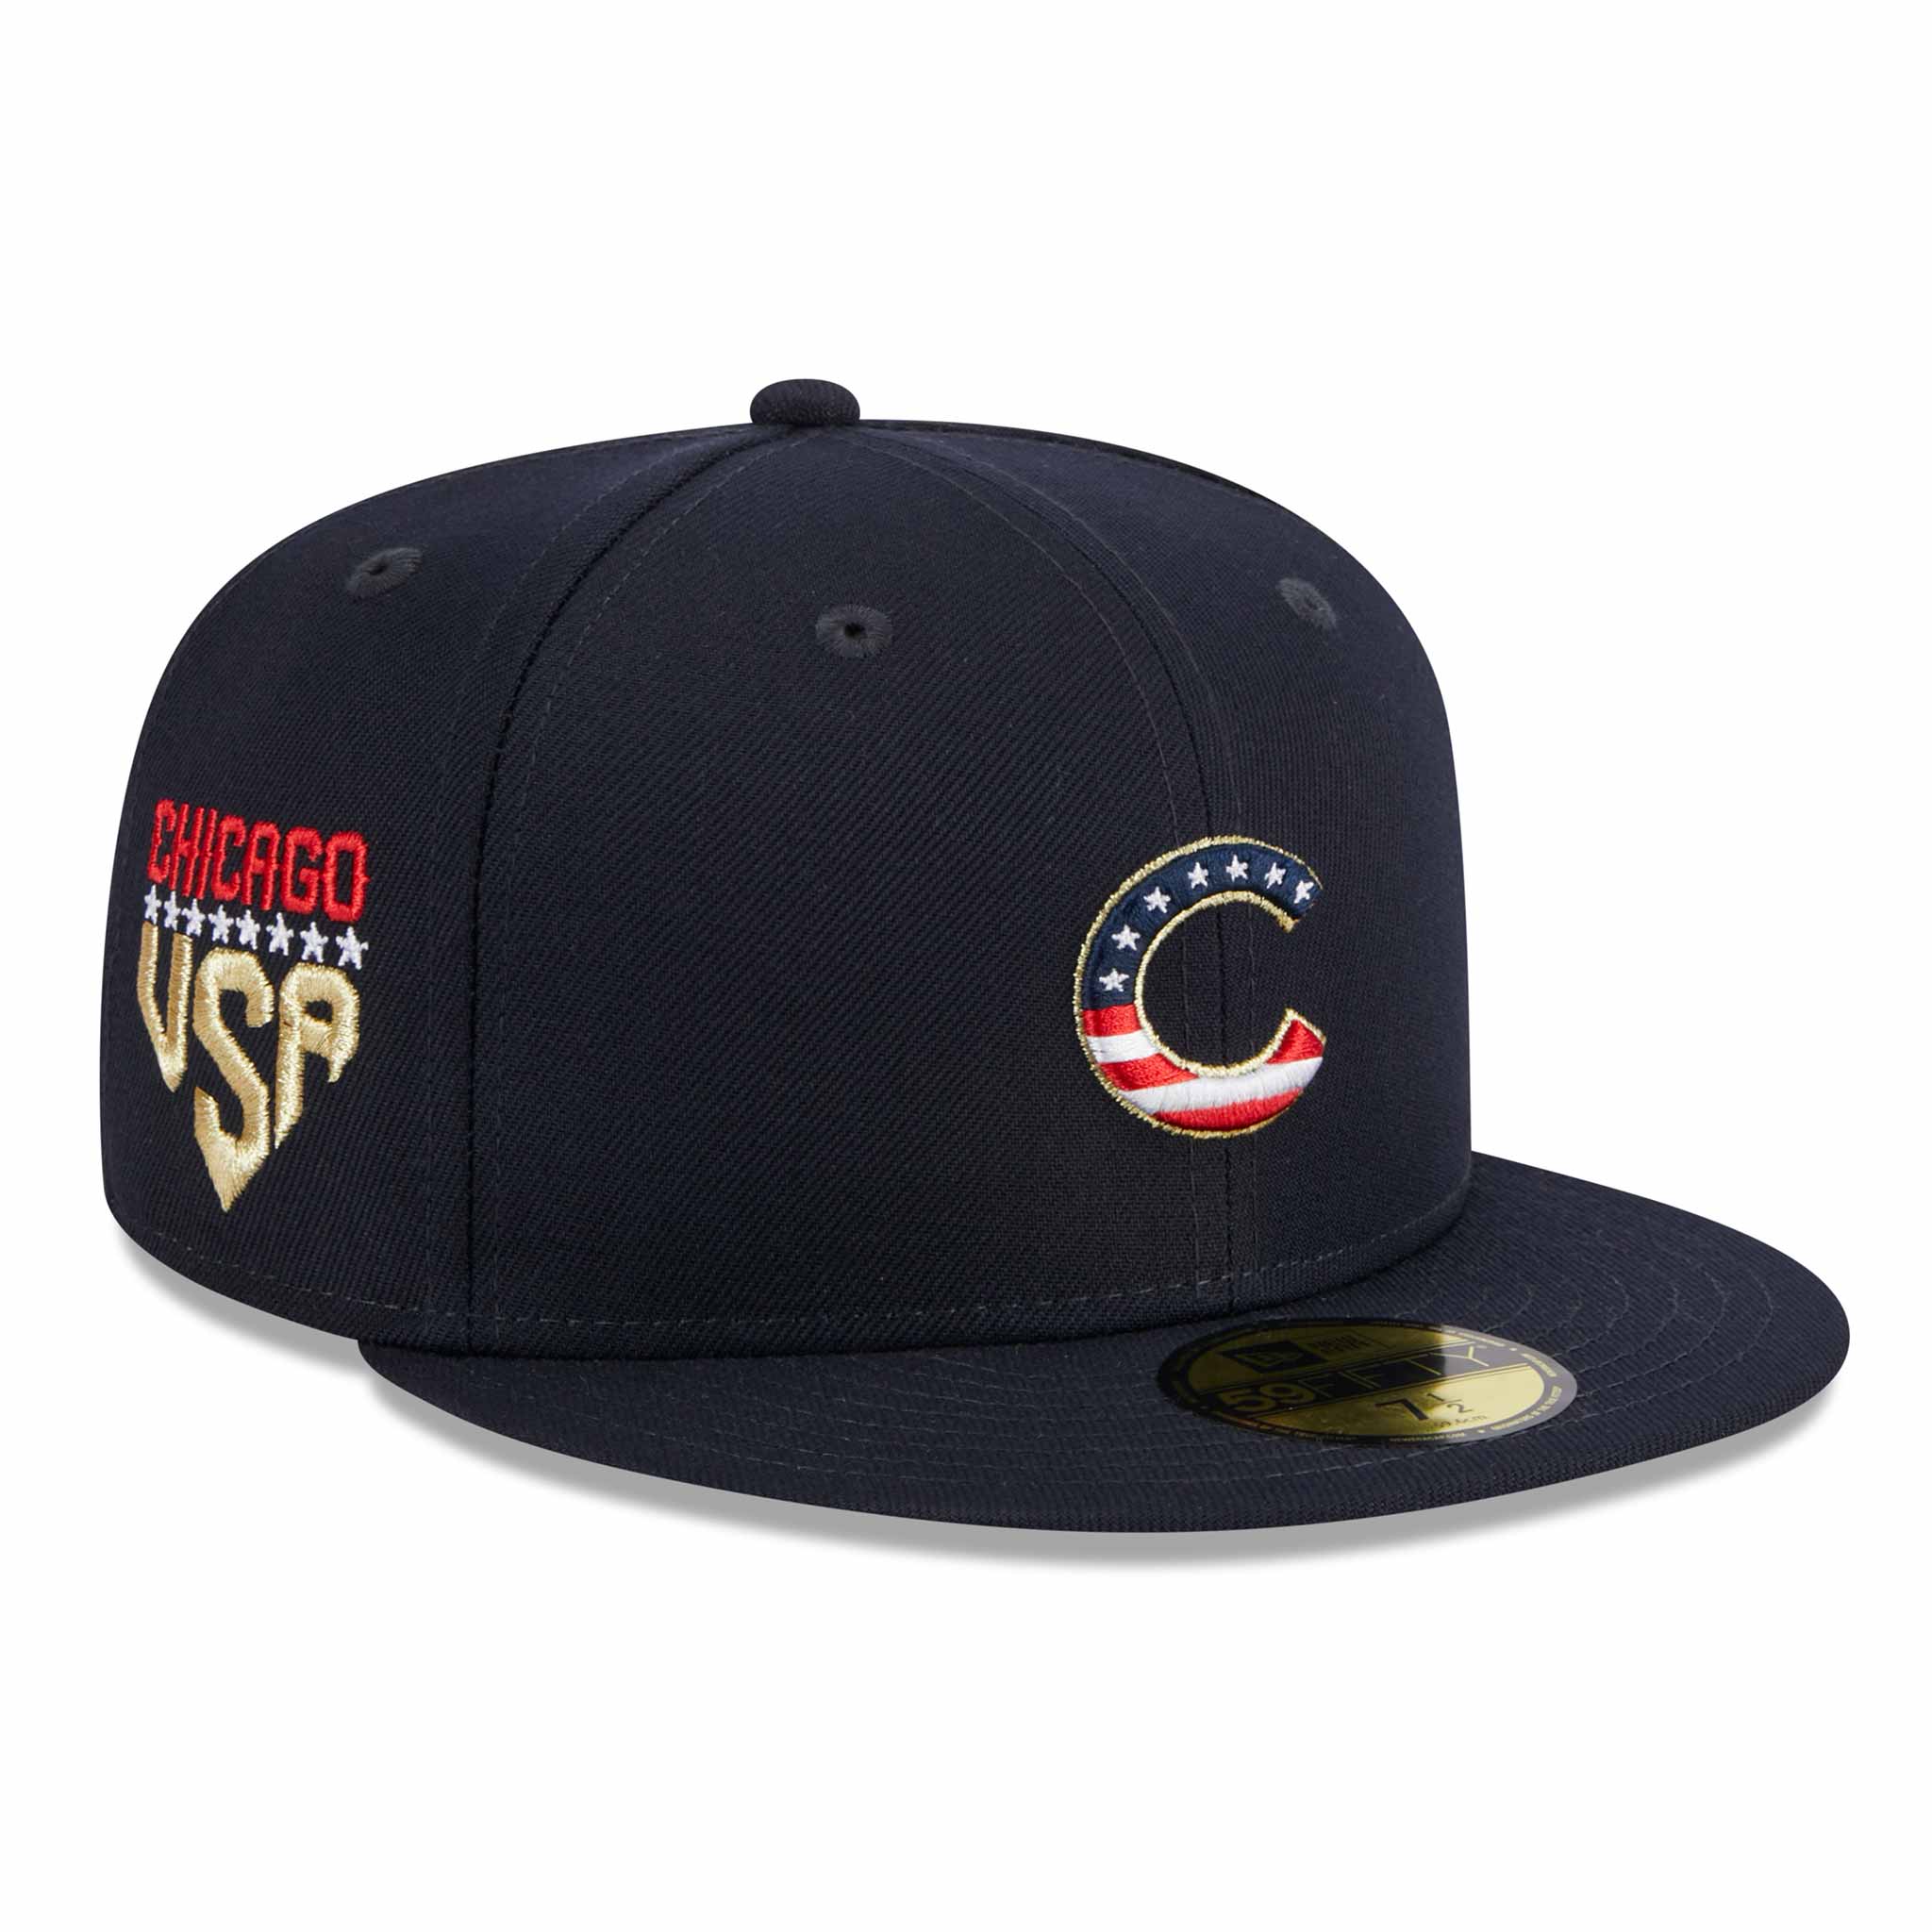 Chicago Cubs Apparel and Merchandise by Wrigleyville Sports: Chicago Cubs  Hats